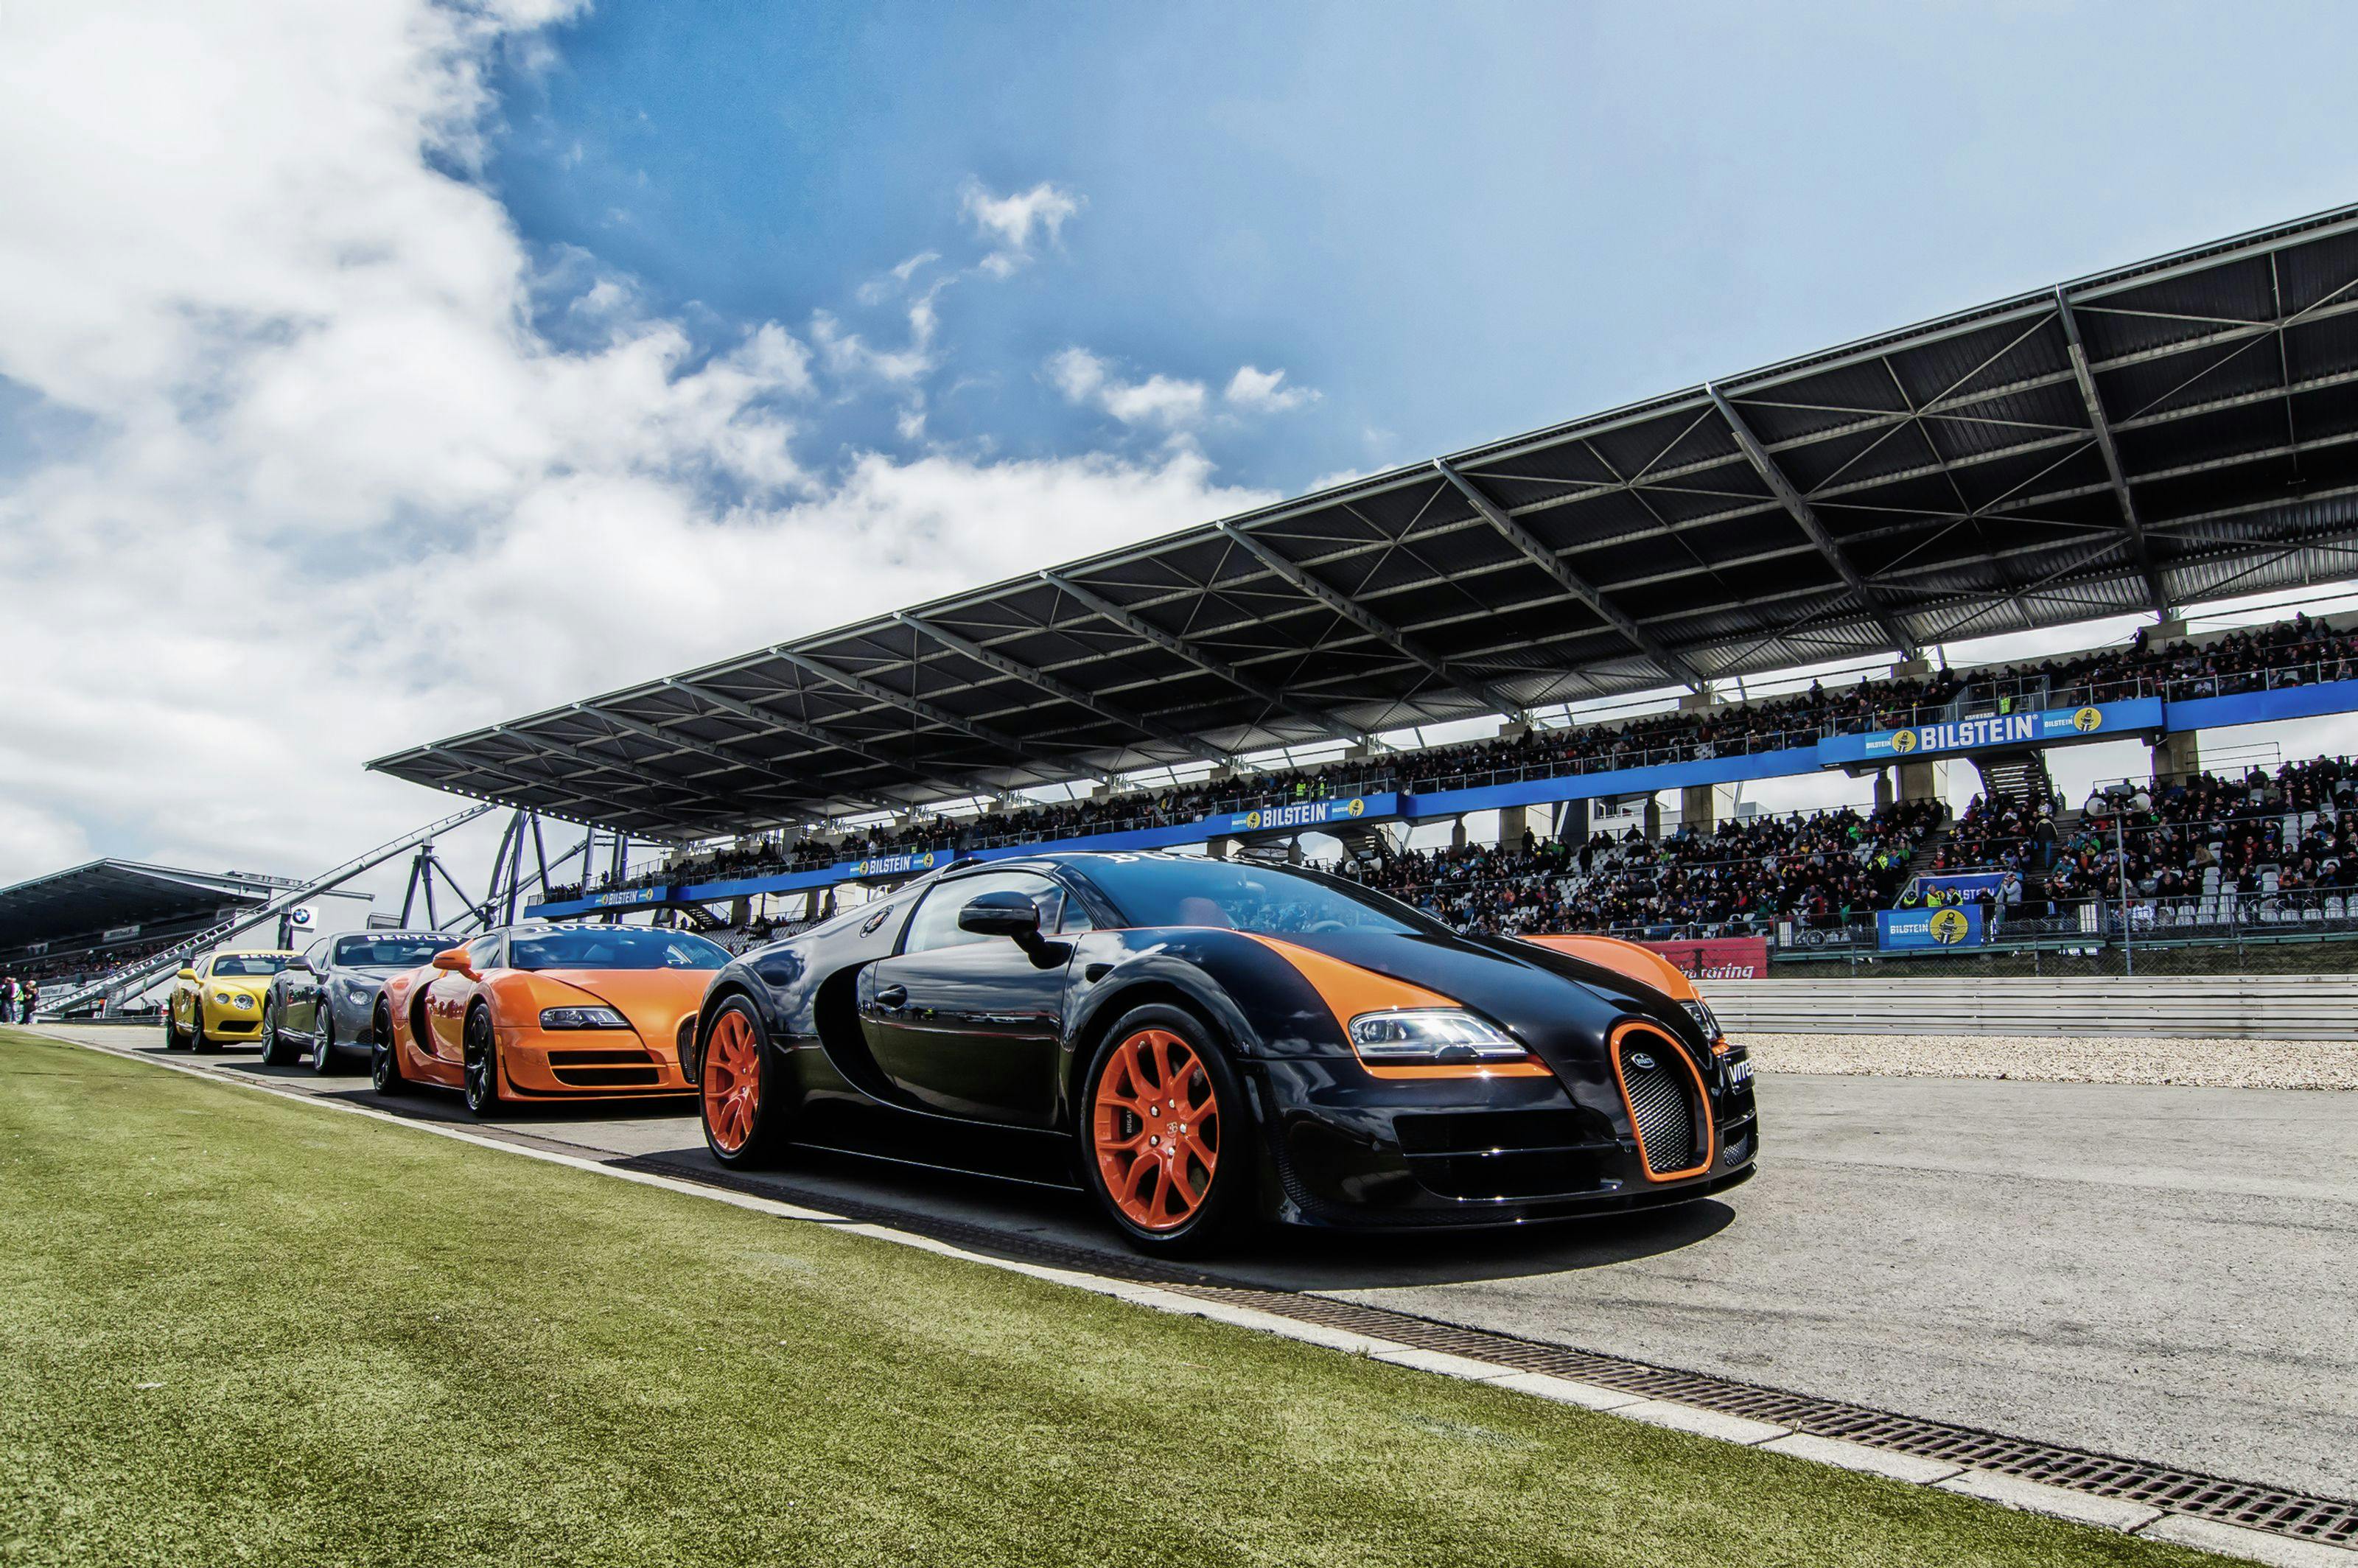 Bugatti took the lead at the Nuerburgring 24 Hours Race